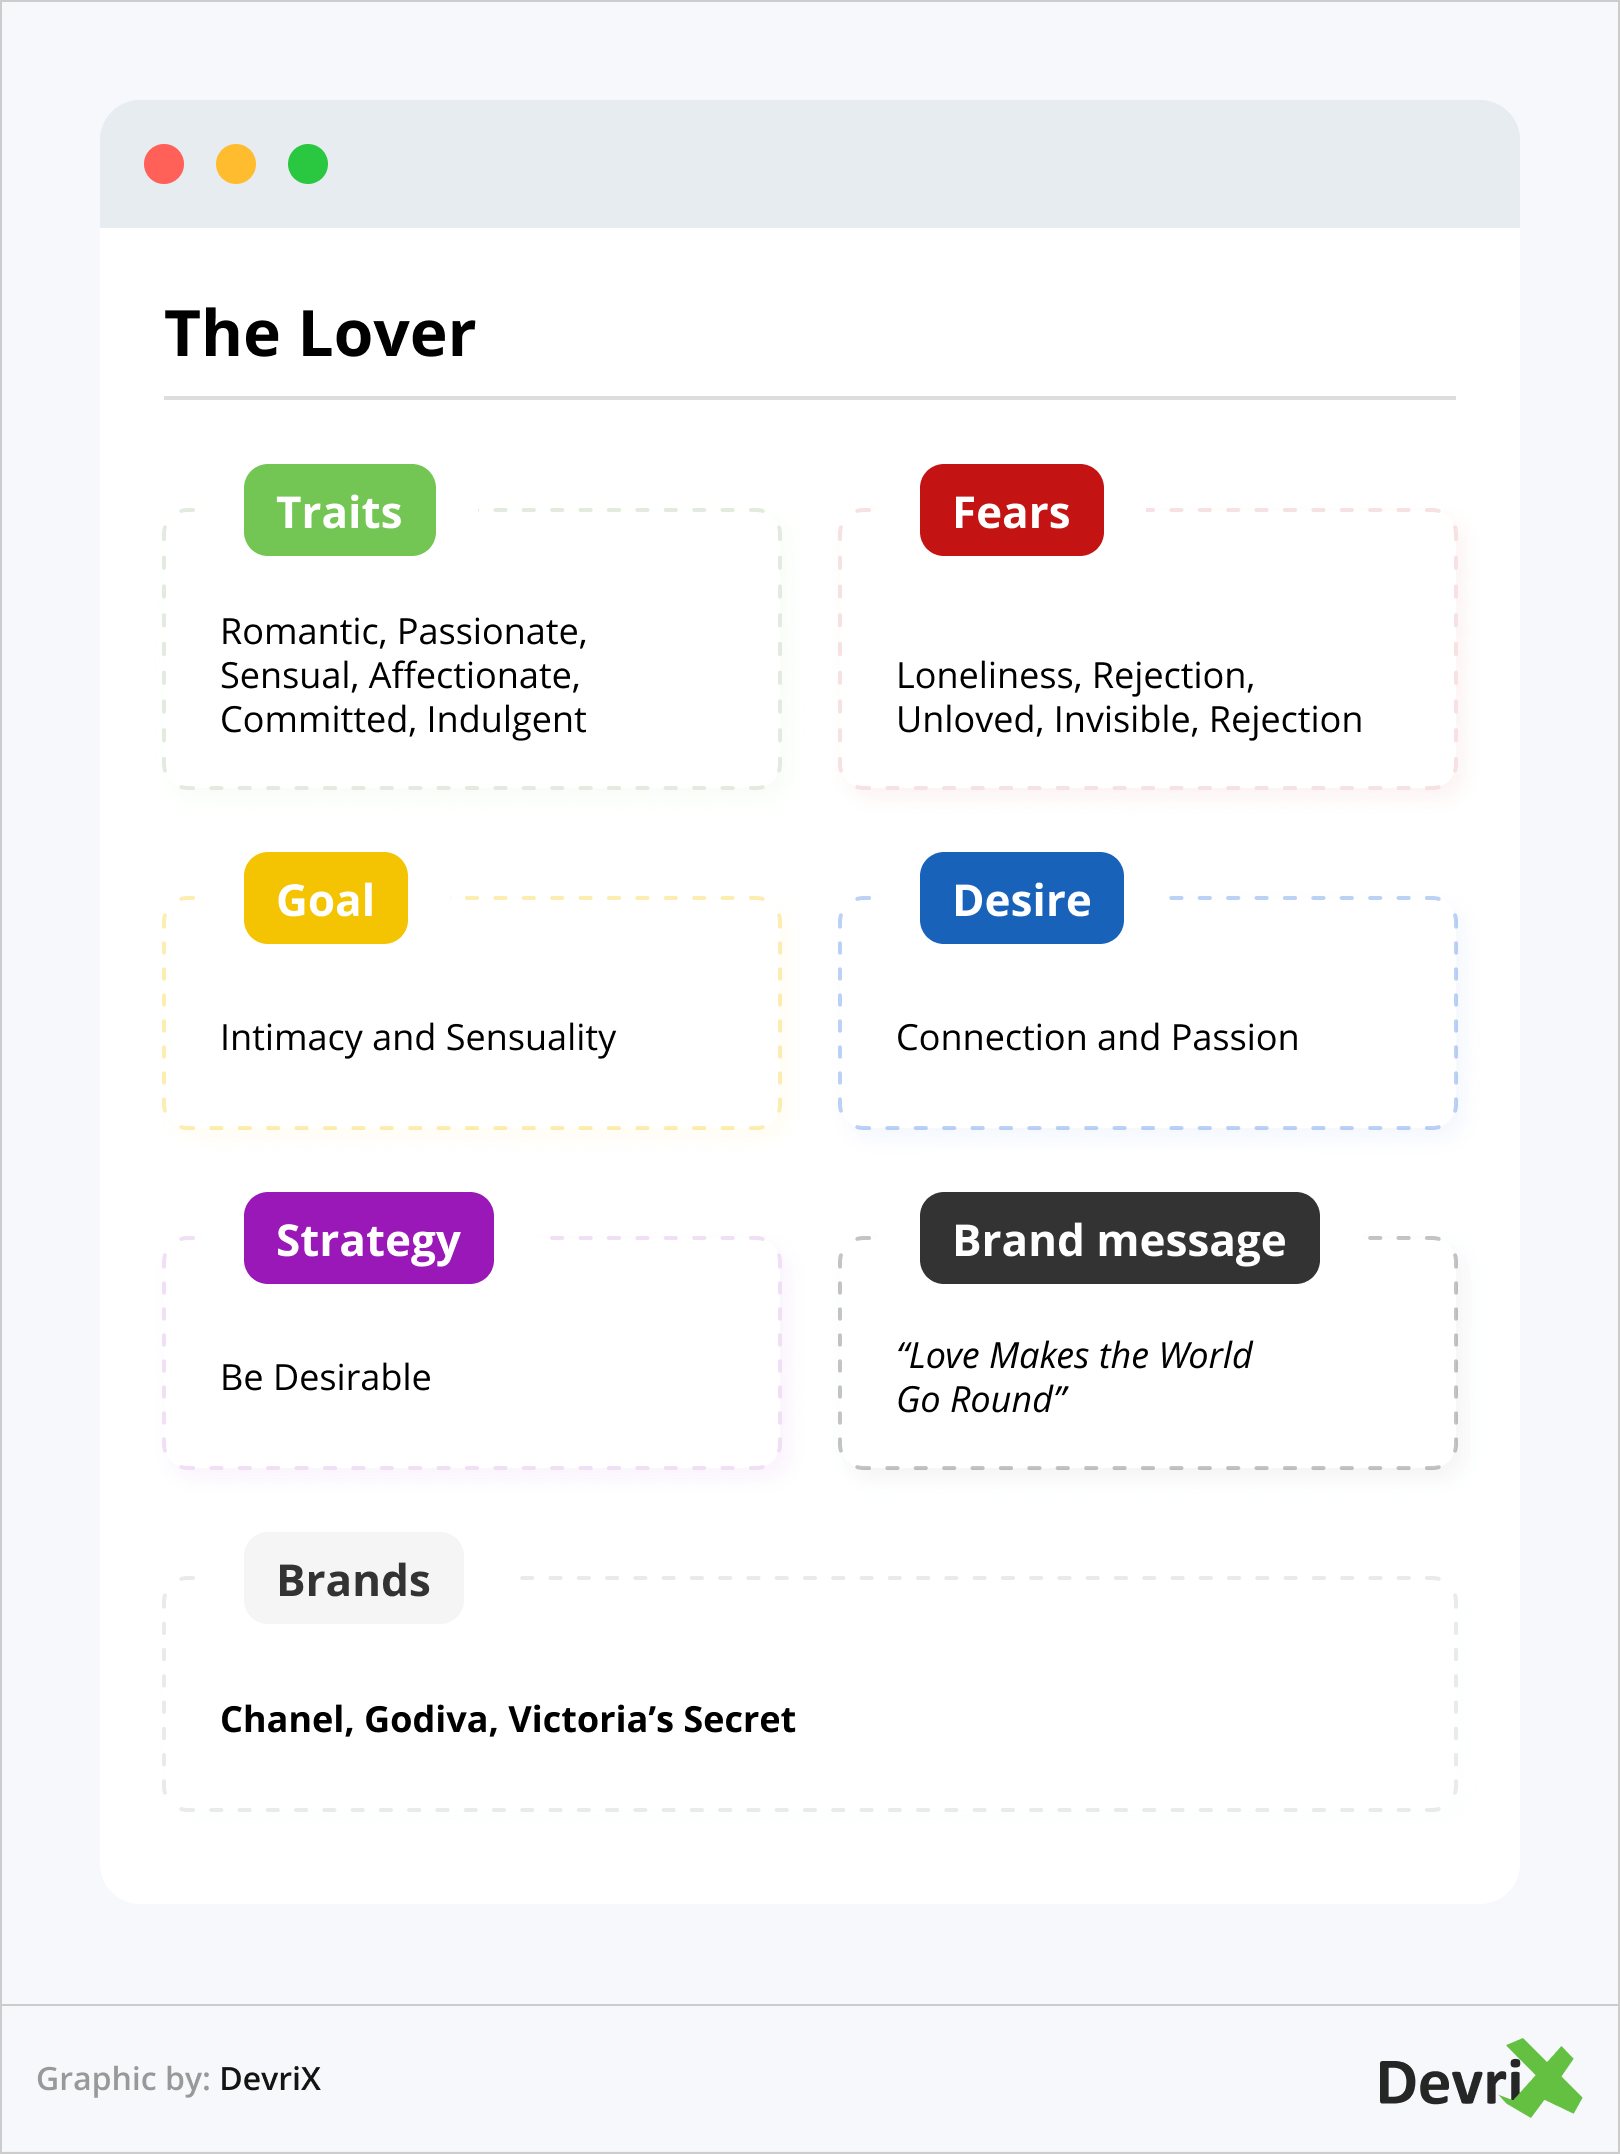 Brand Archetype - The Lover